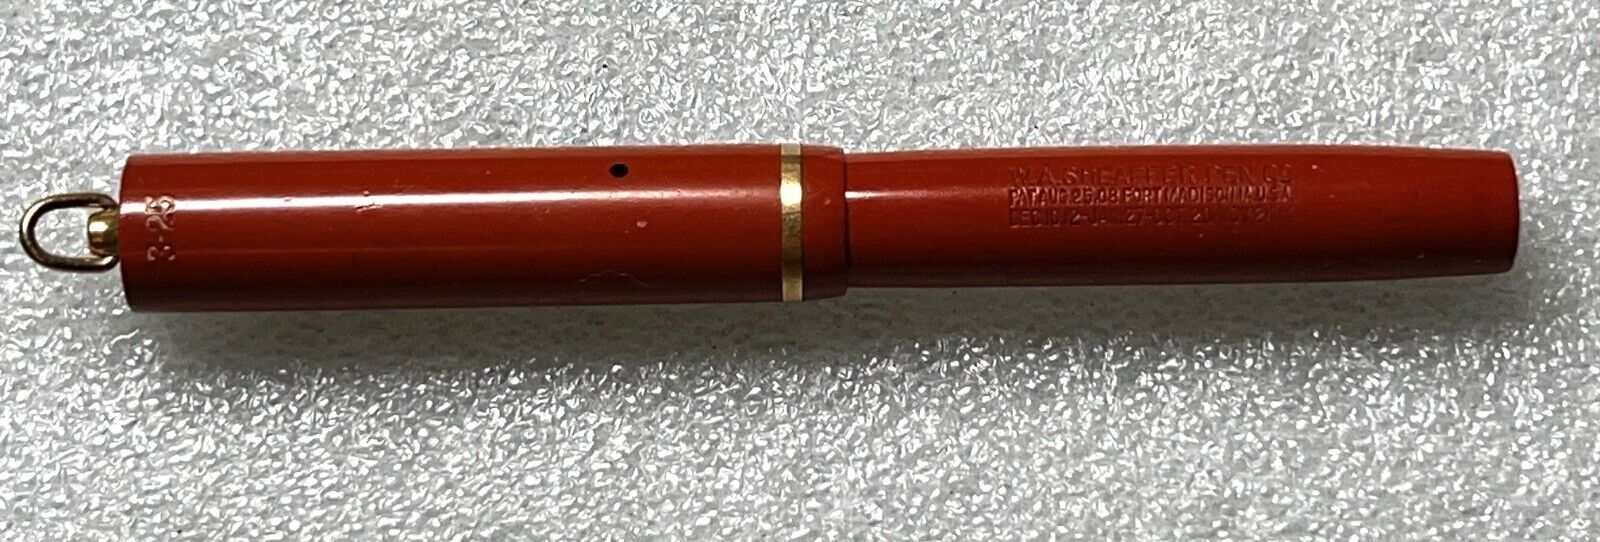 Fully Serviced* 1920's 3-25 Coral Sheaffer ring-top fountain pen